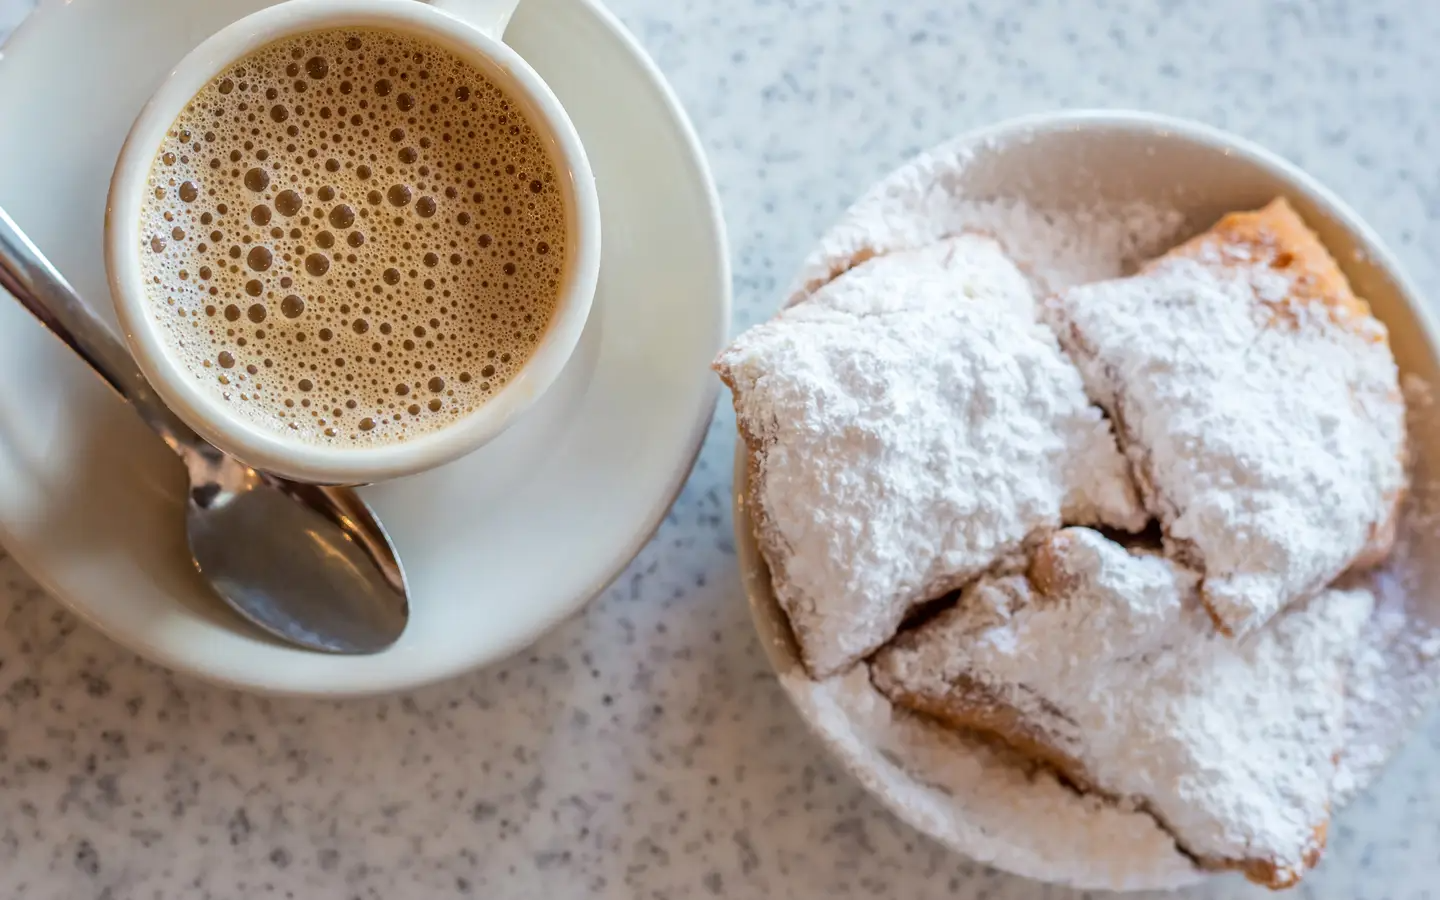 A table with a plate of beignets and a cup of coffee